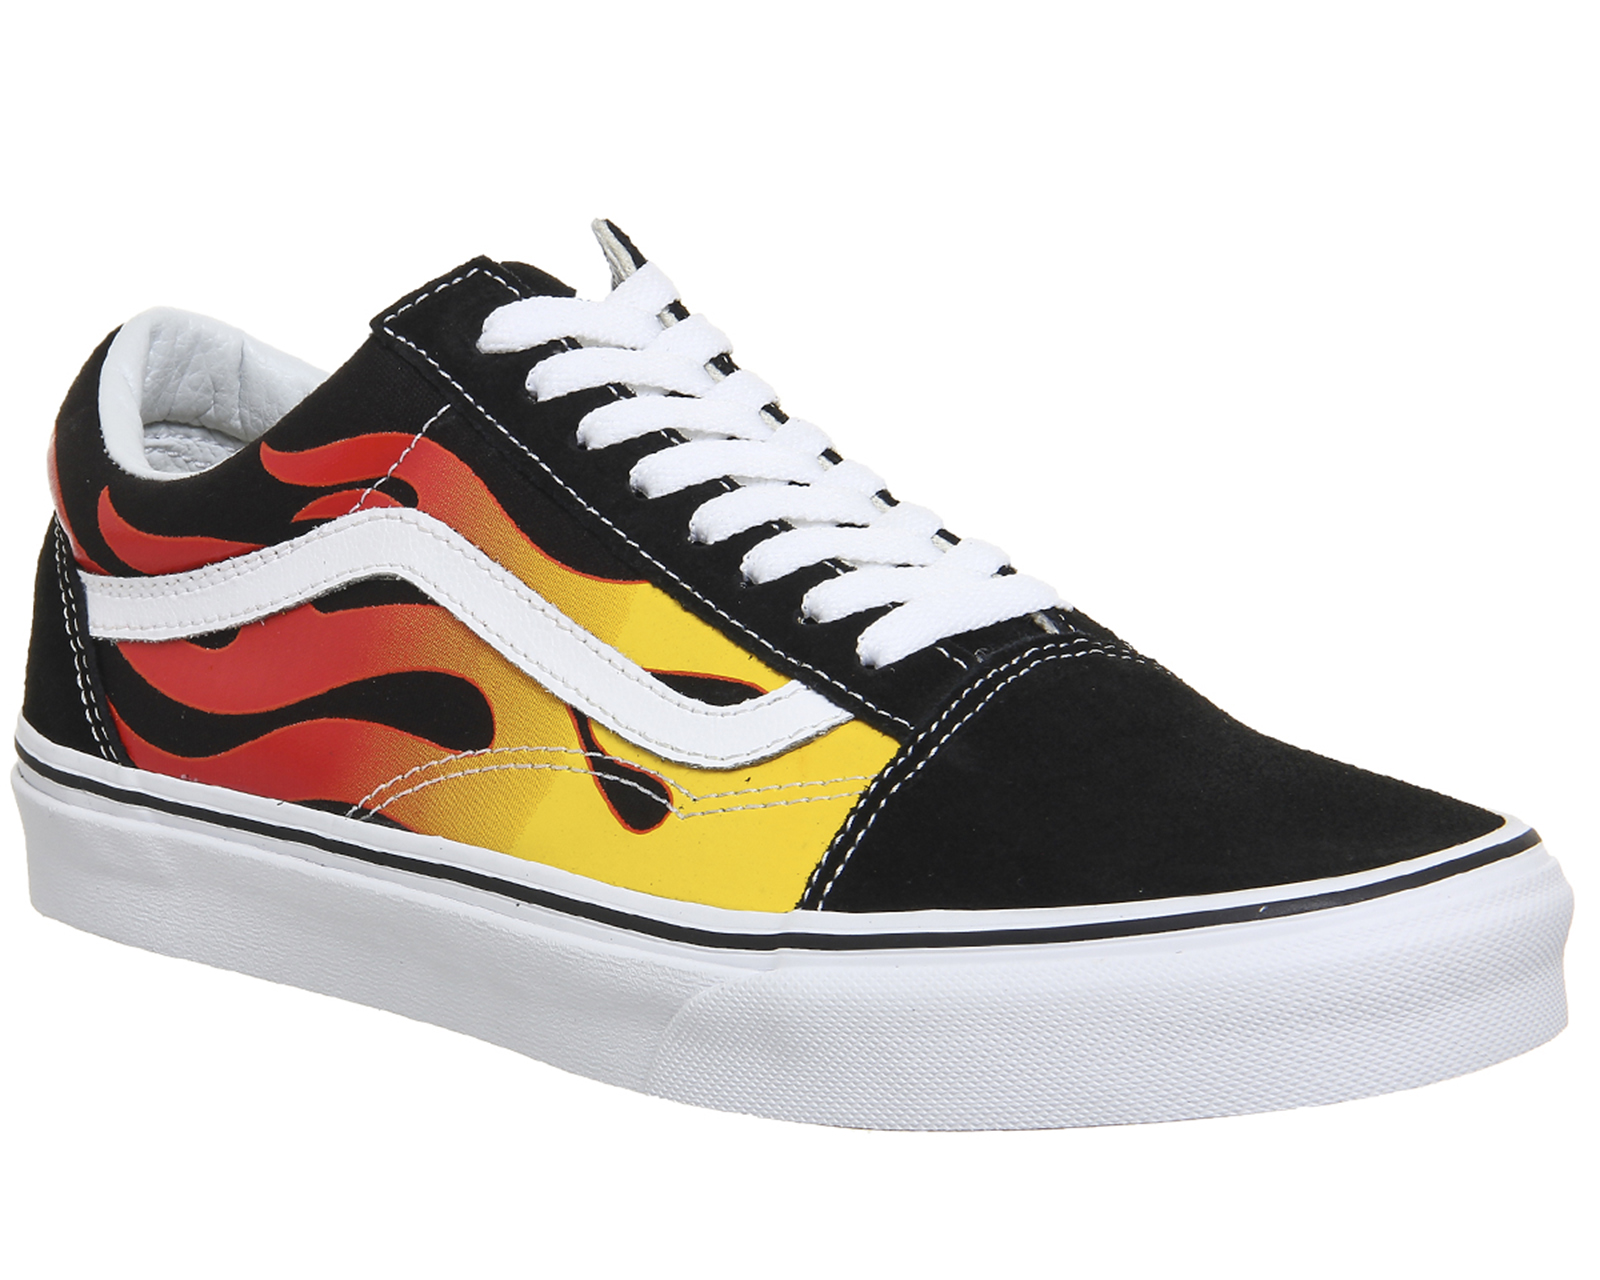 Vans Fire Flames Shoes Flash Sales, UP TO 67% OFF | www.istruzionepotenza.it